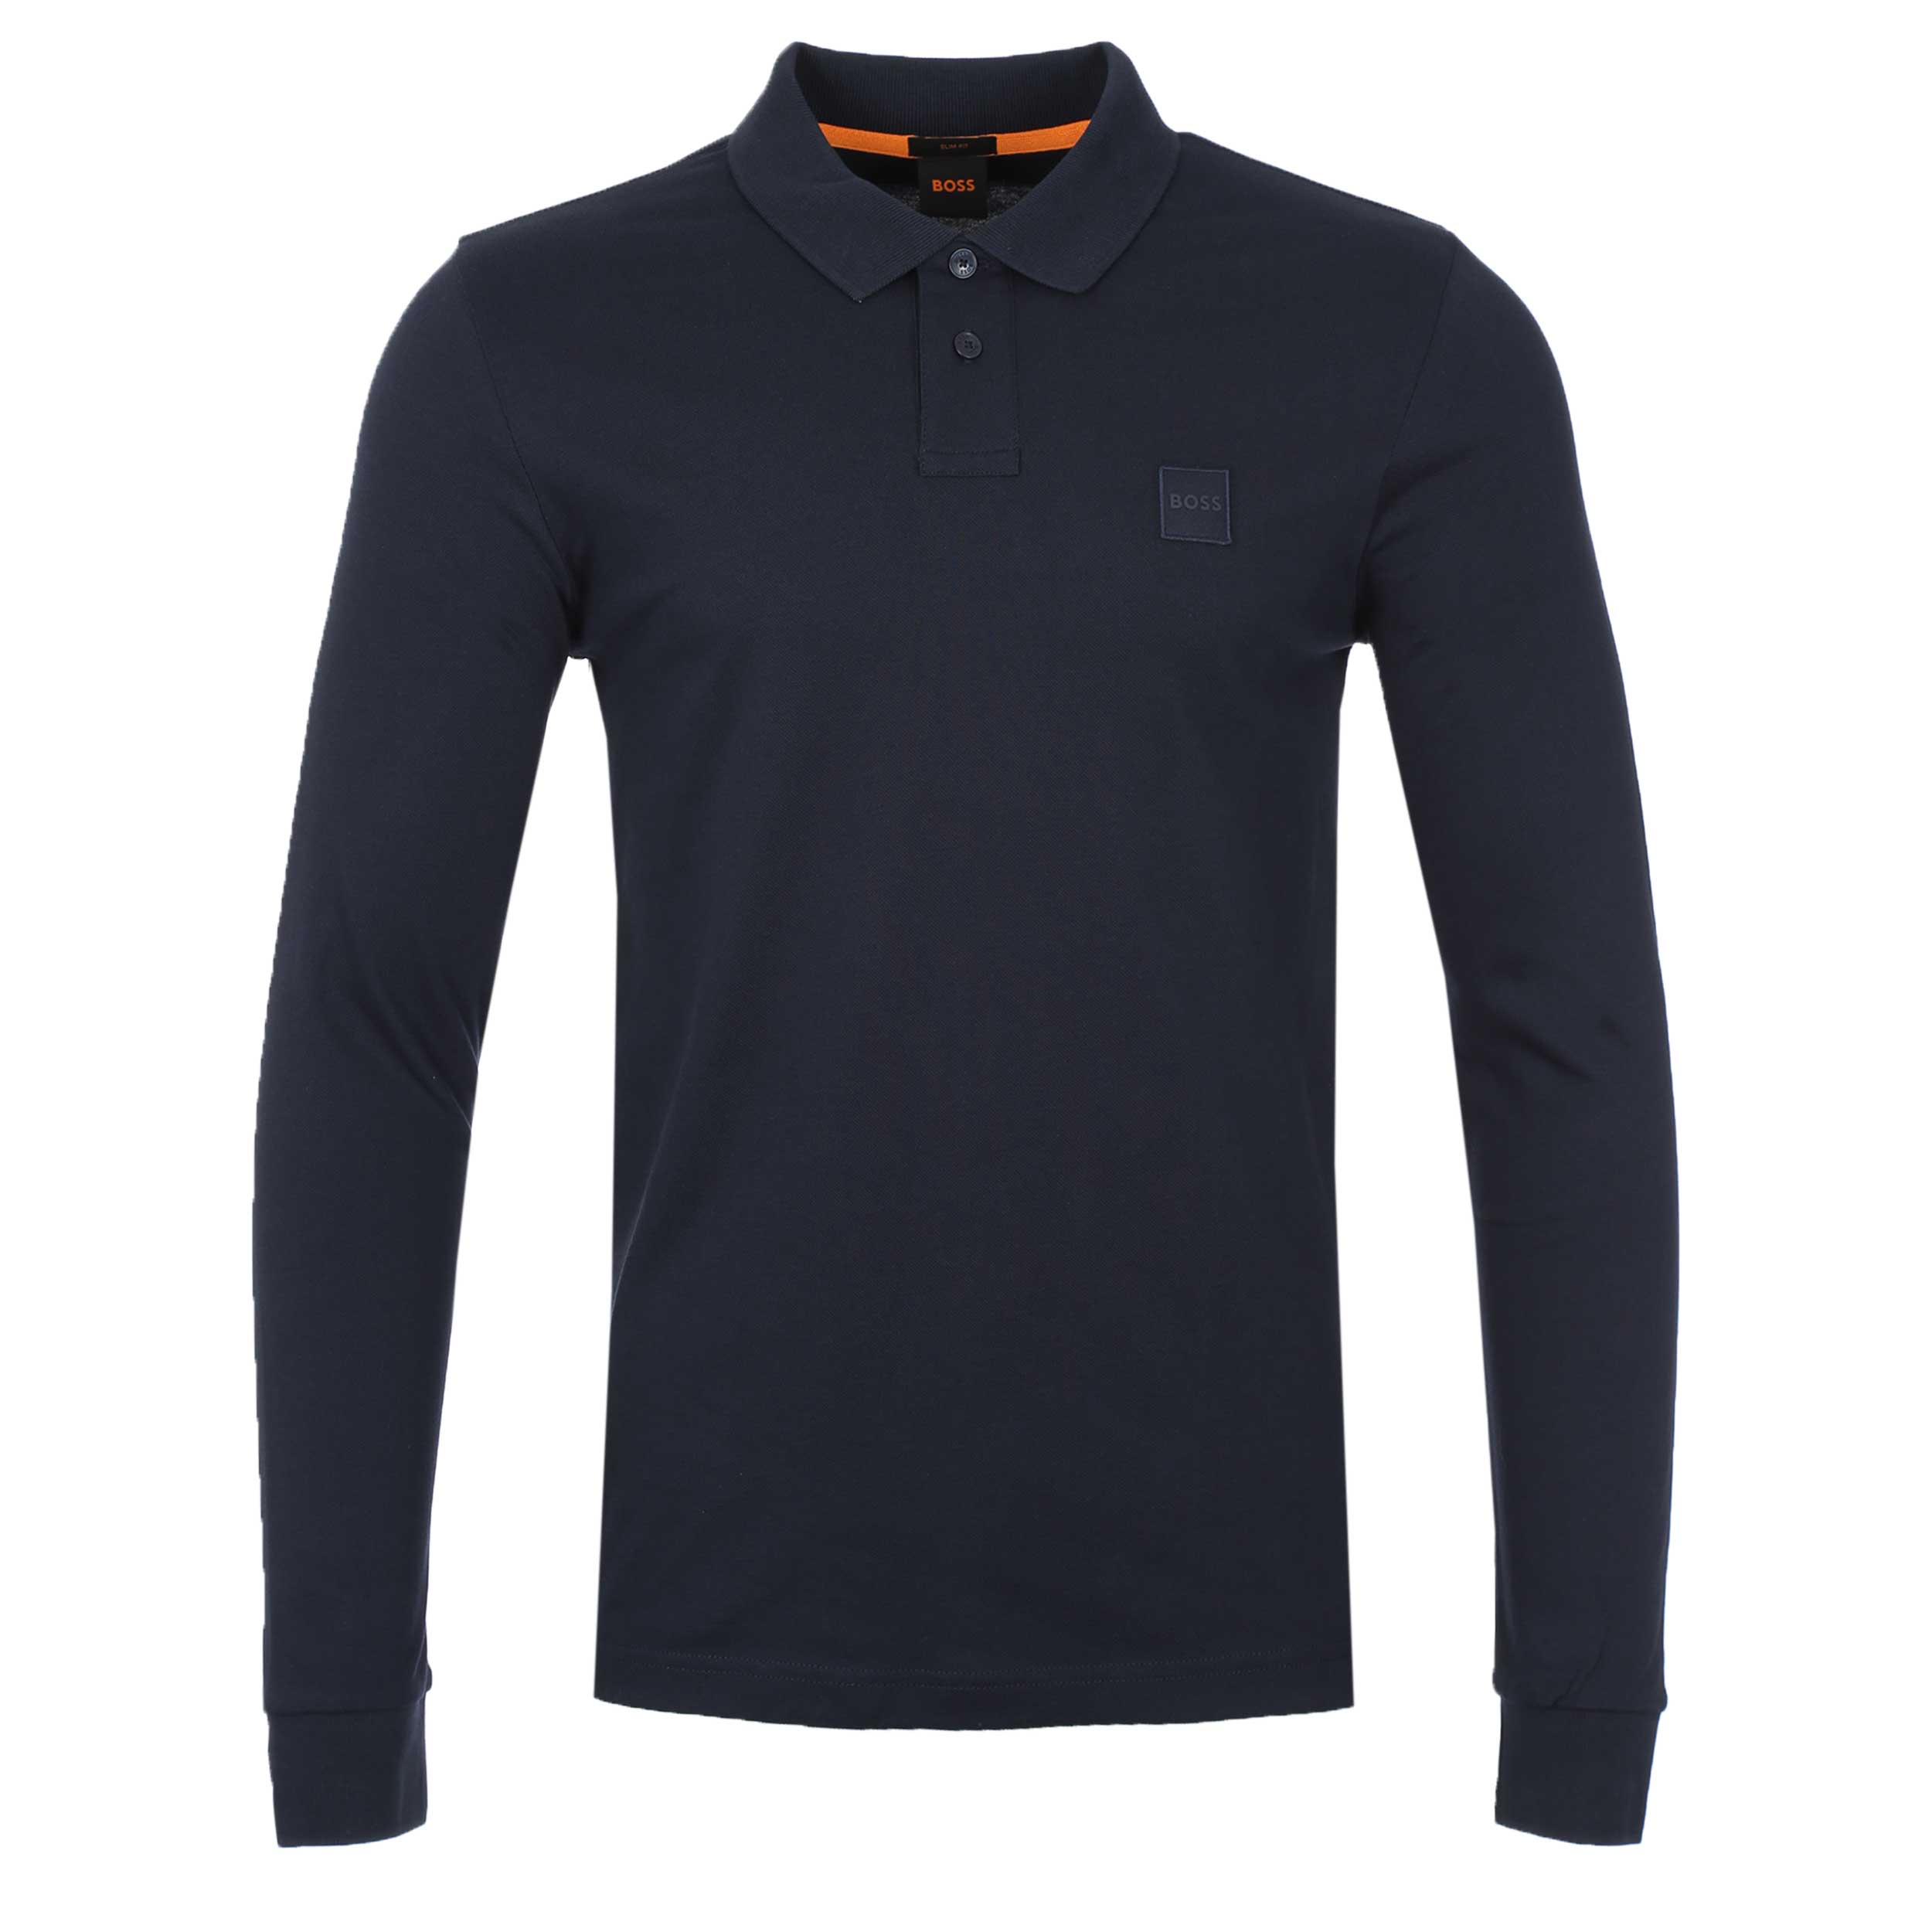 BOSS Passerby Long Sleeve Polo Shirt in Navy